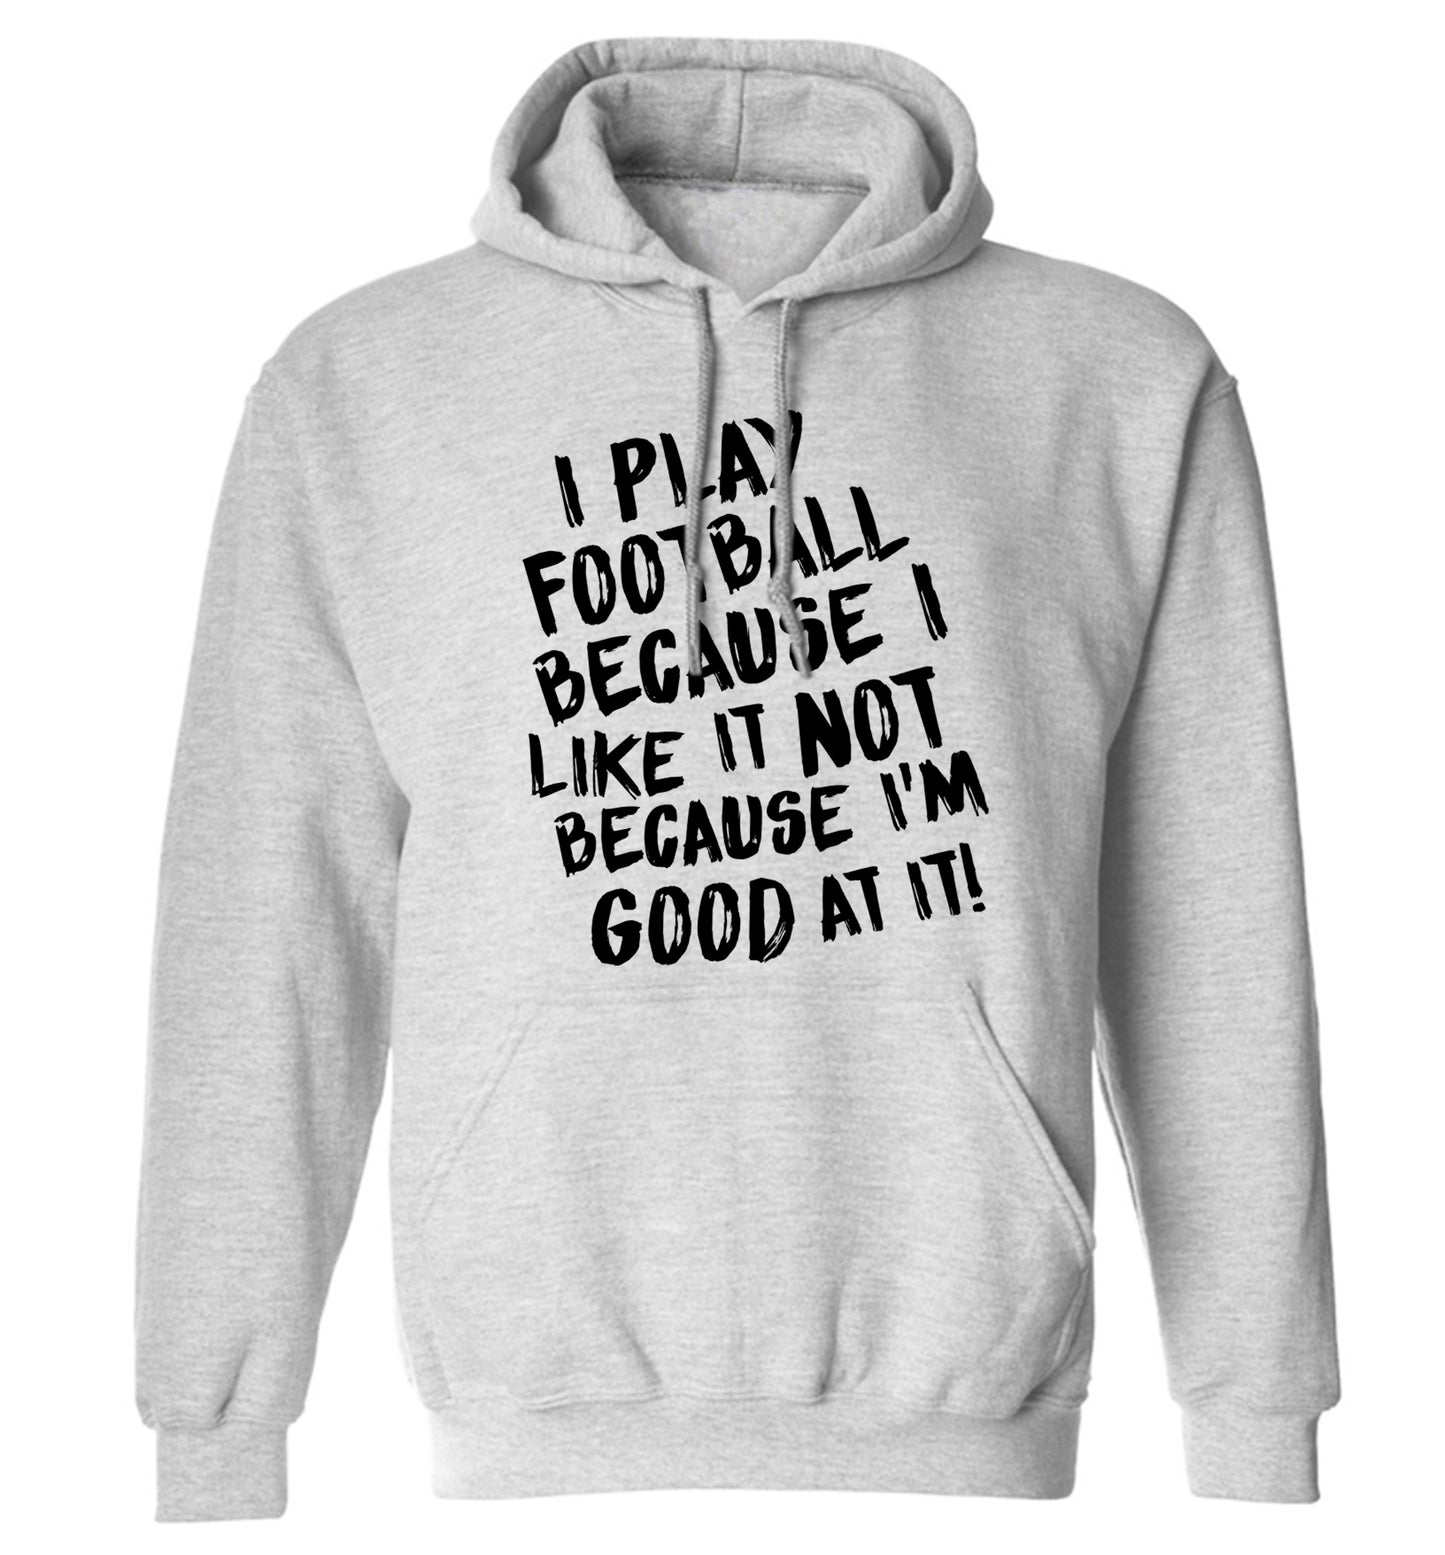 I play football because I like it not because I'm good at it adults unisexgrey hoodie 2XL